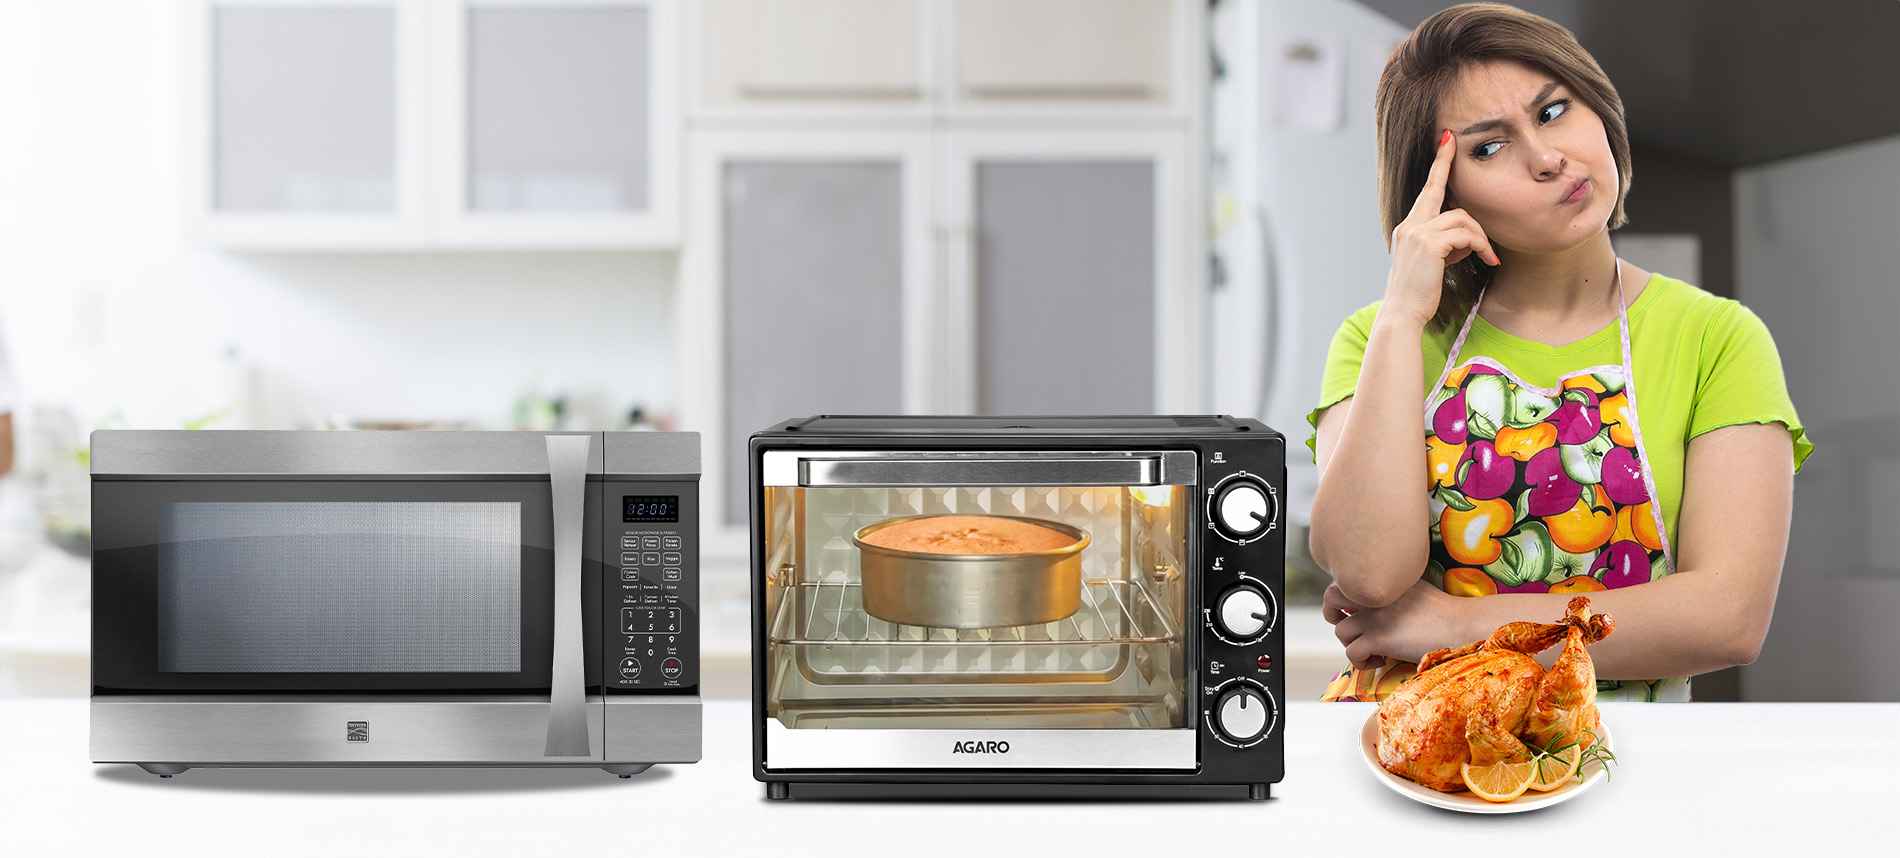 Toaster Oven vs. Microwave: Which Appliance Is Best for You?